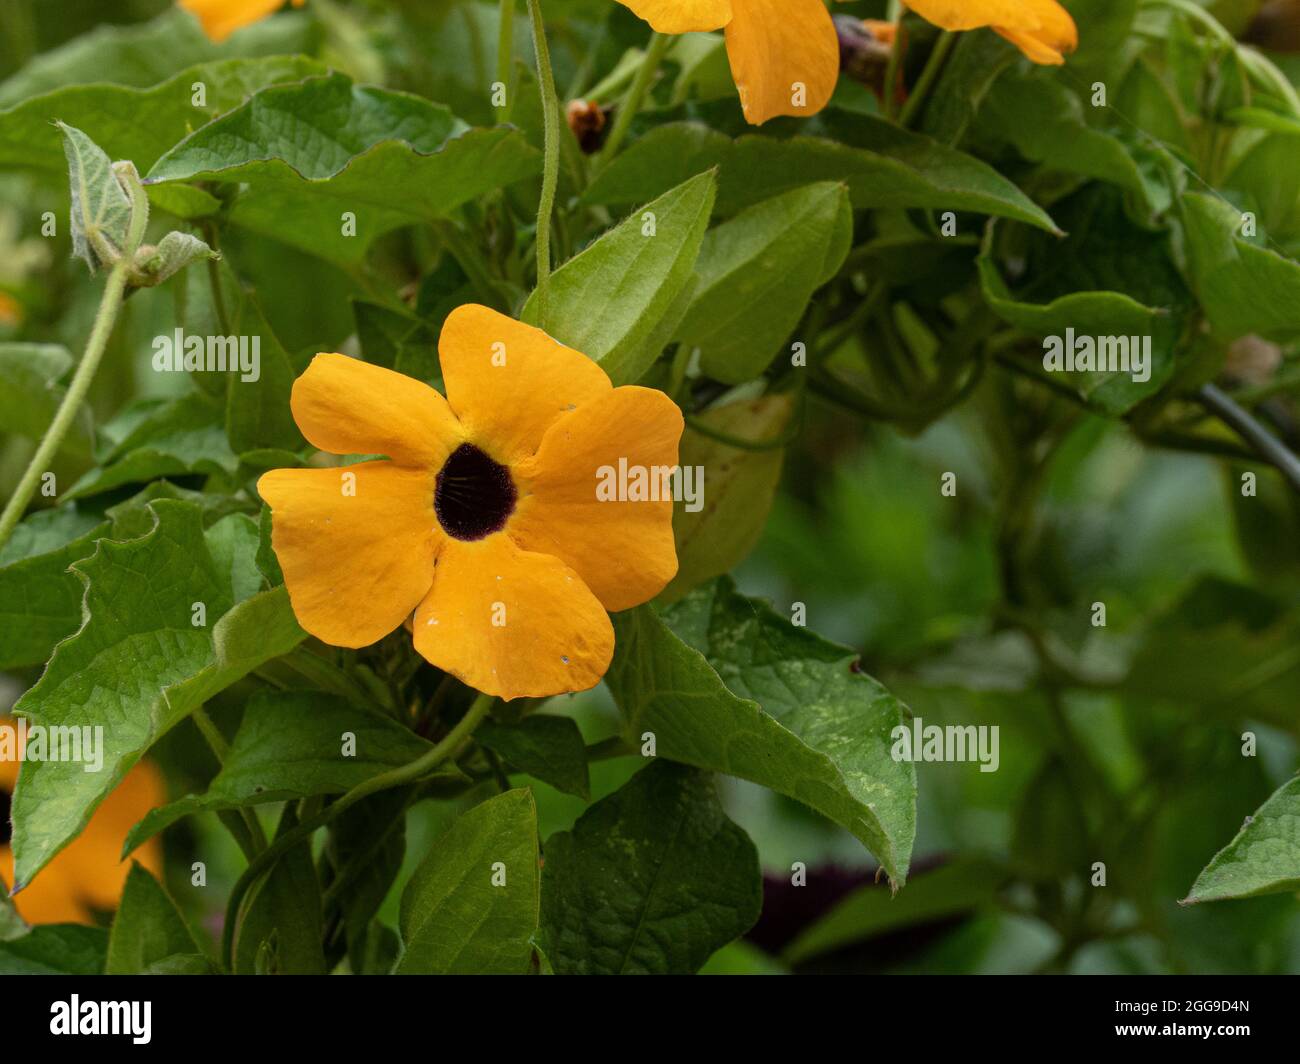 A close up of a yellow black centred flower of the annual climber Thunbergia alata - Black Eyed Susan Stock Photo